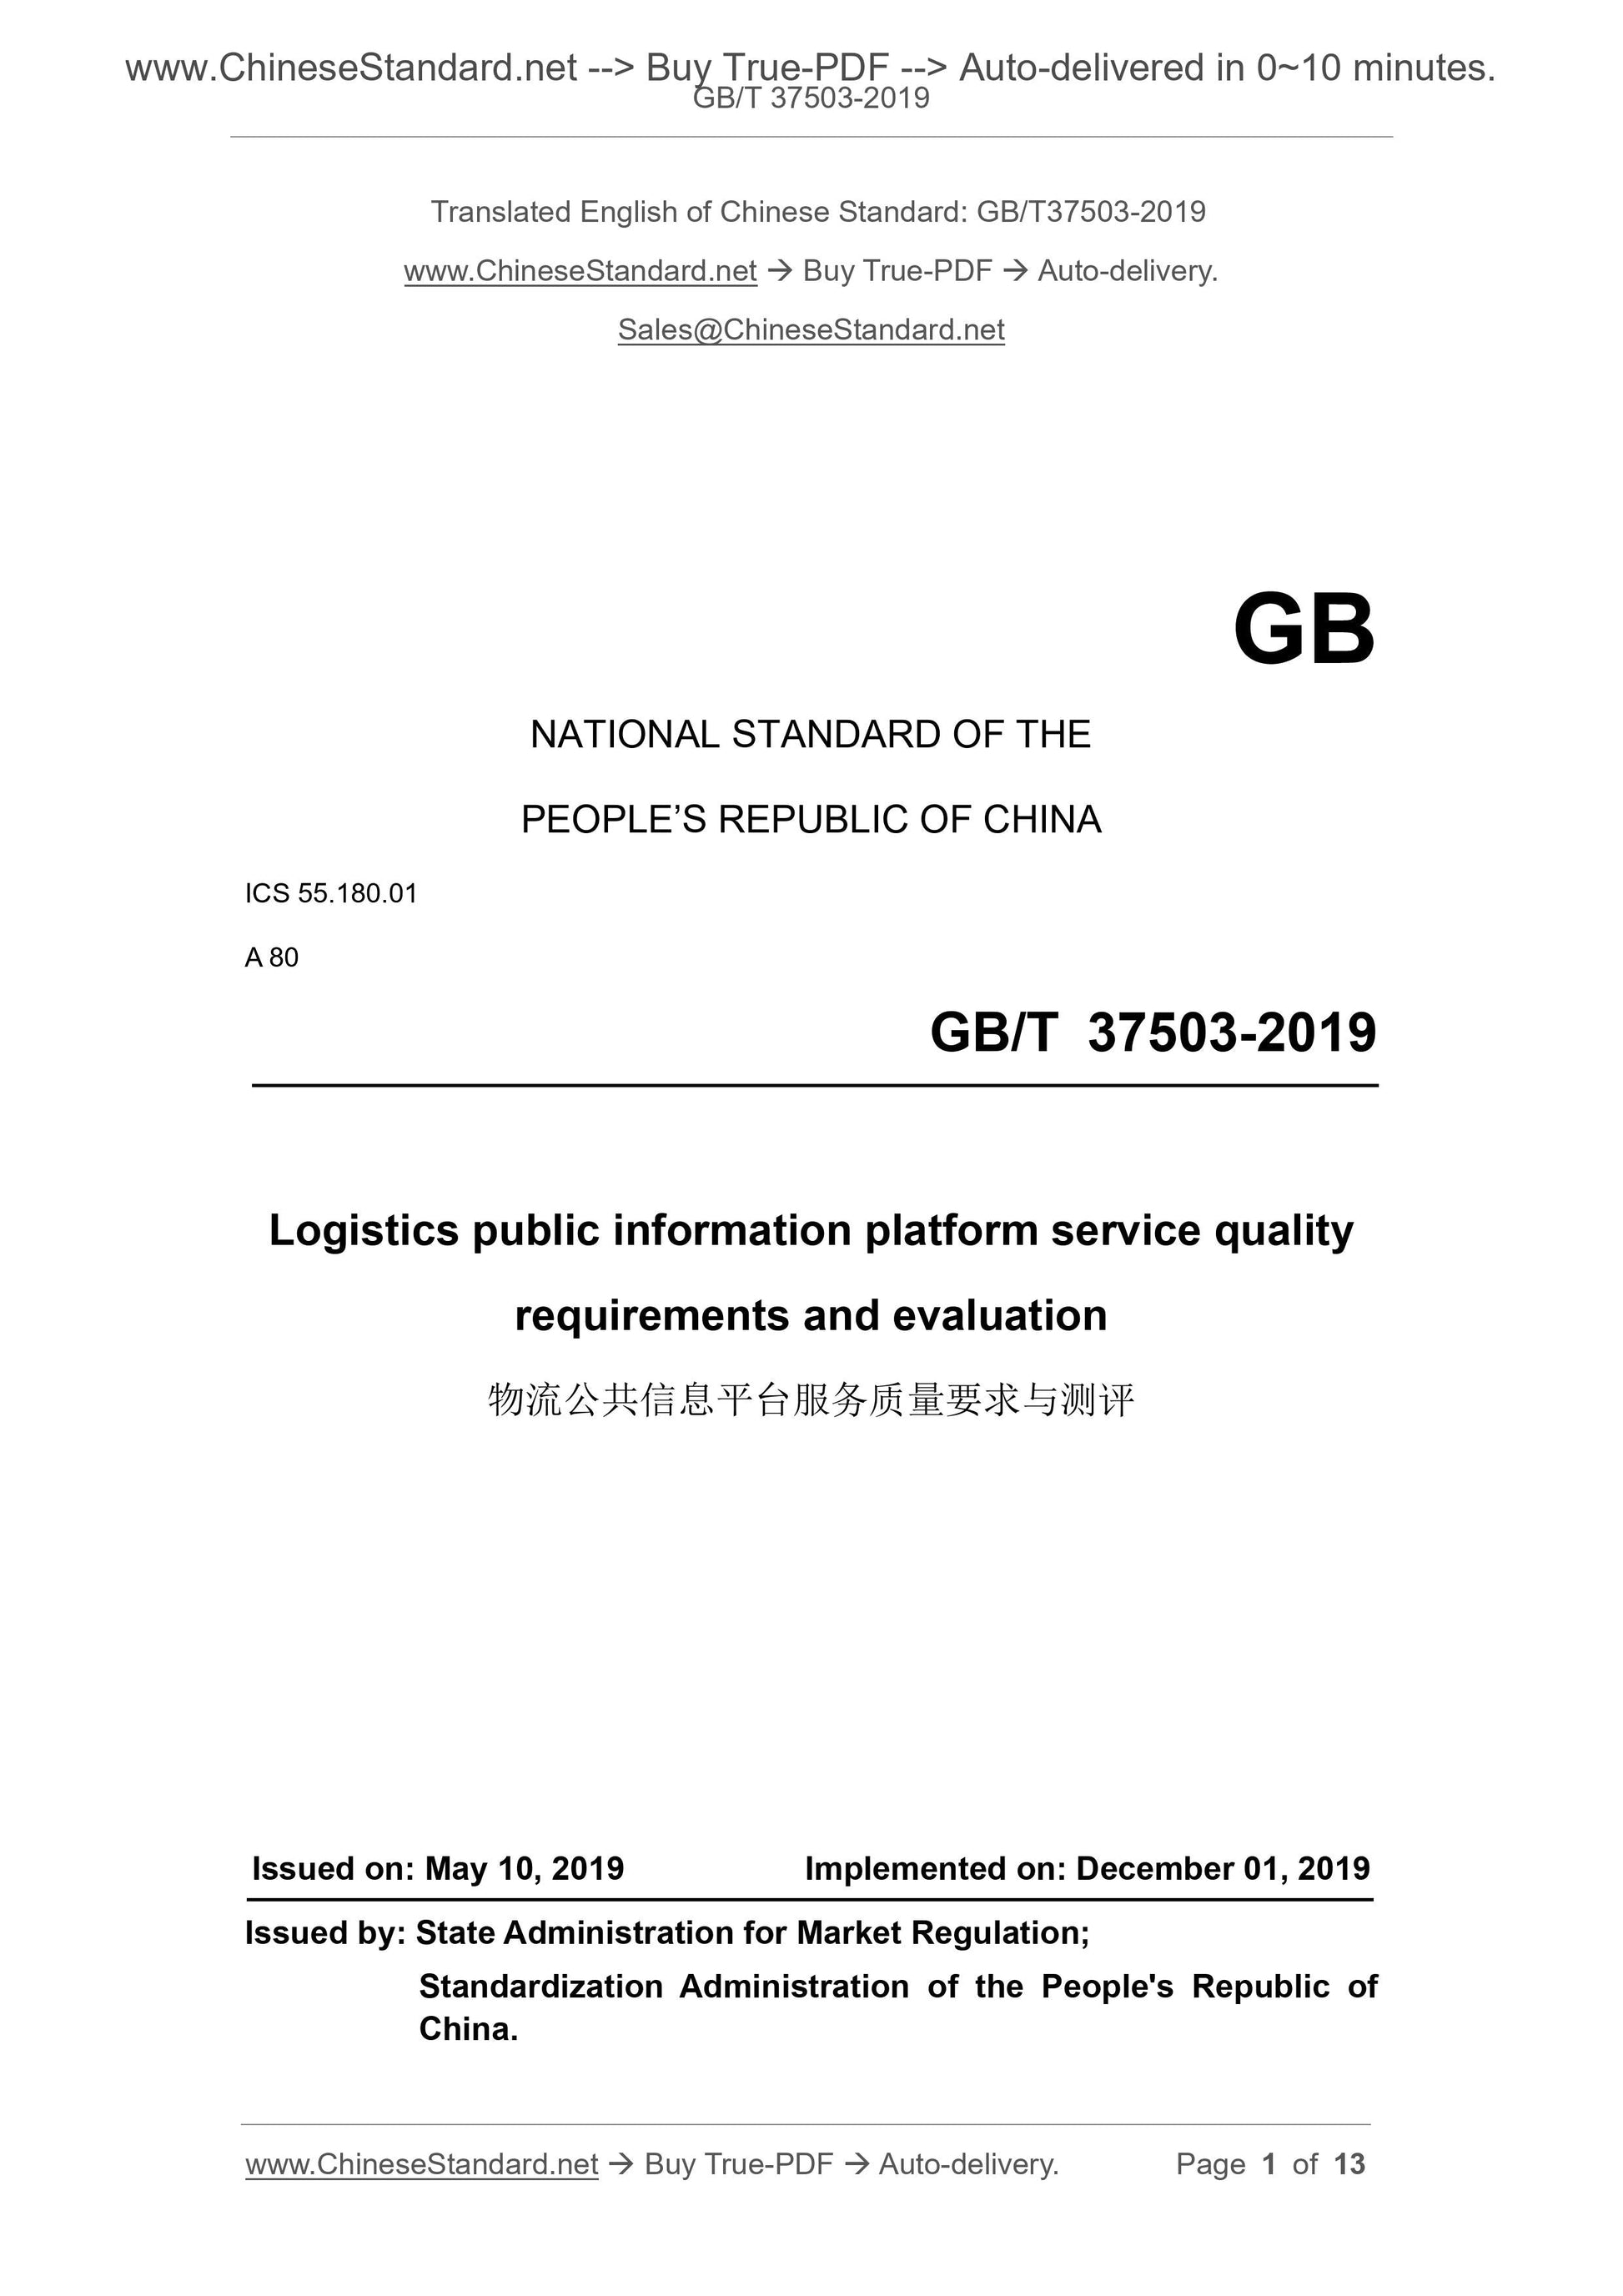 GB/T 37503-2019 Page 1